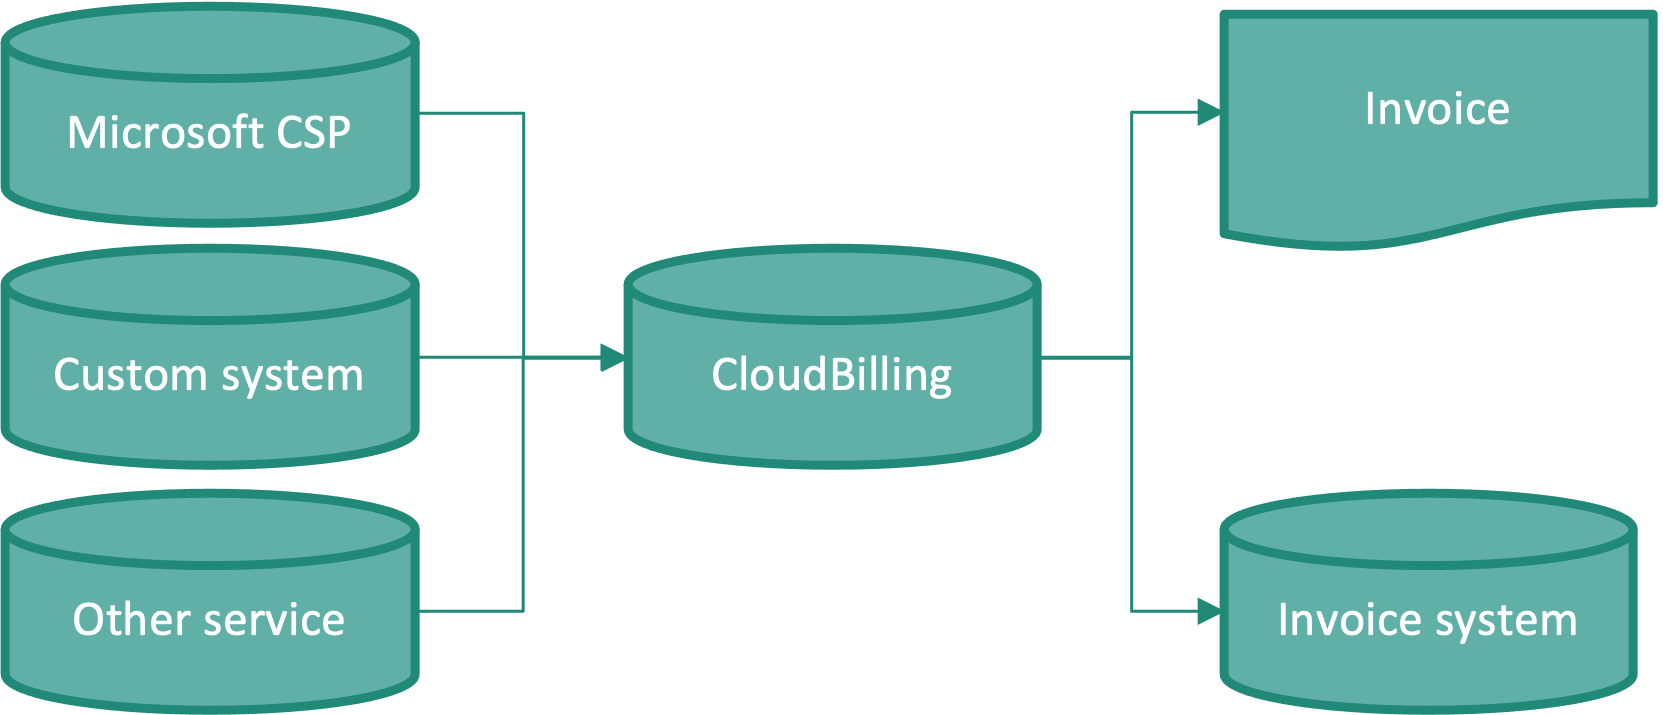 Figure Configuration 1 Simplified CloudBilling process, receiving purchase information